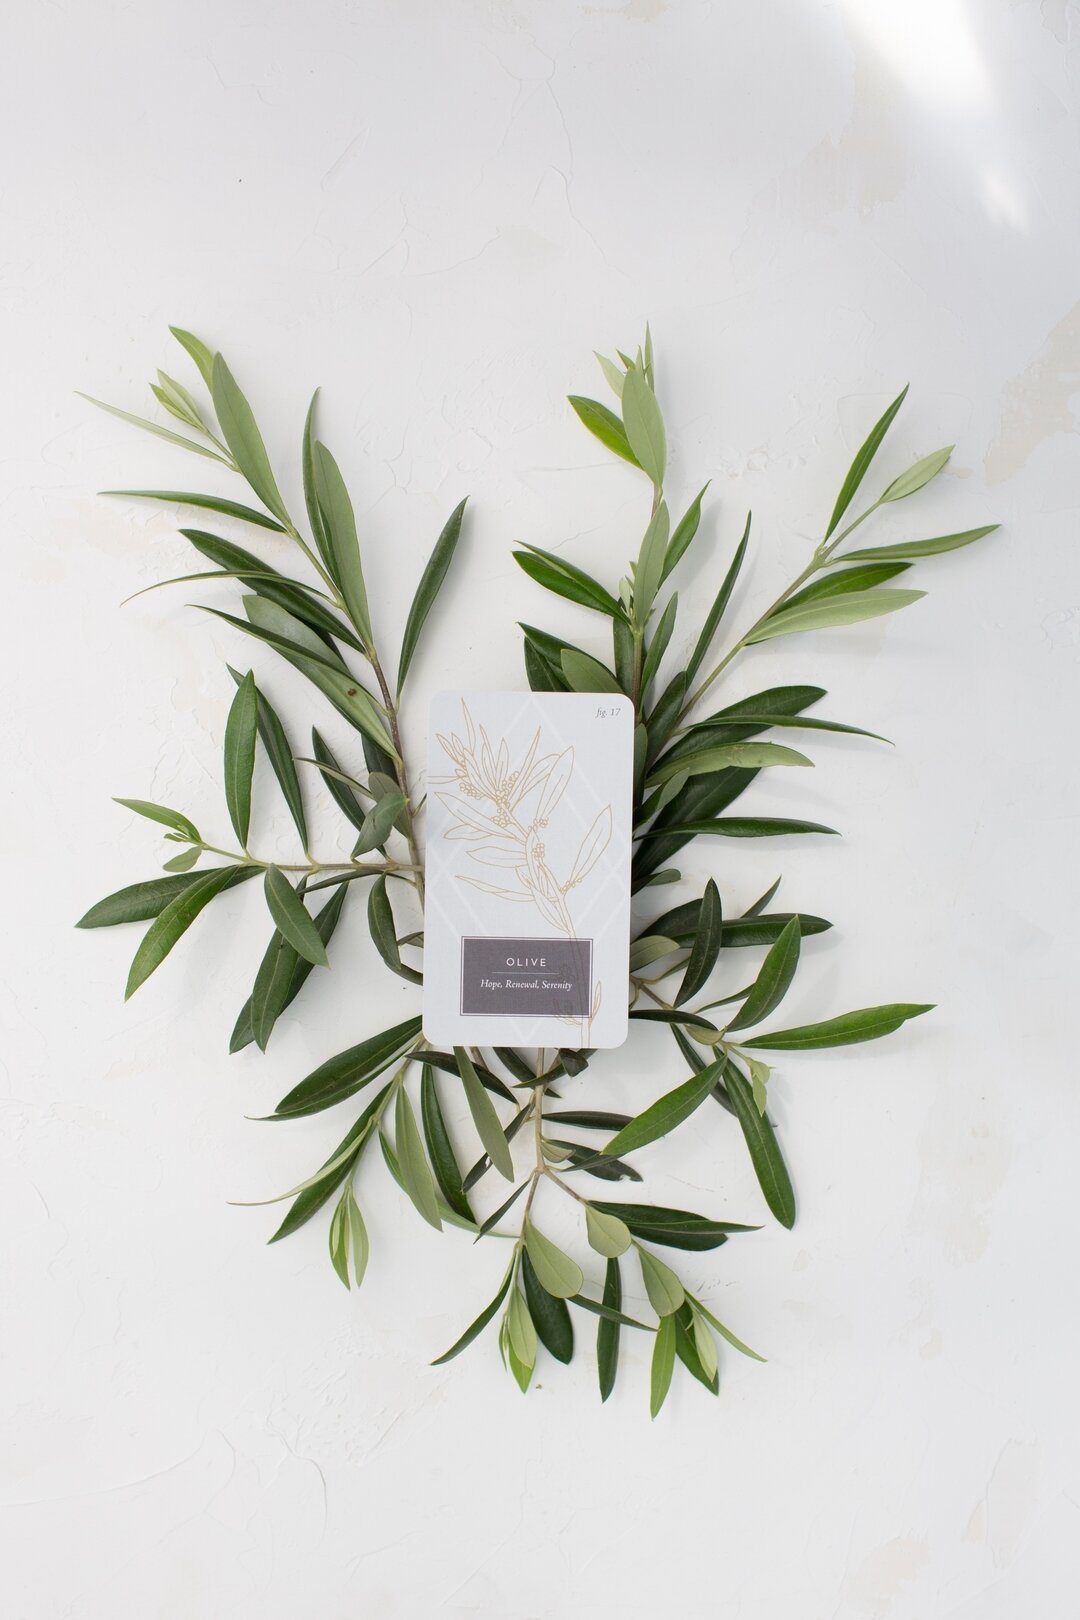 Olive {the Star} | Hope, Renewal, Serenity⠀⠀⠀⠀⠀⠀⠀⠀⠀⁣.⠀⠀⠀⠀⠀⠀⠀⠀⠀
The Olive branch is universally recognized as a symbol for peace, so it&rsquo;s a fitting pairing for the Star of traditional Tarot, which is a card of hope, renewal, and serenity. Let th